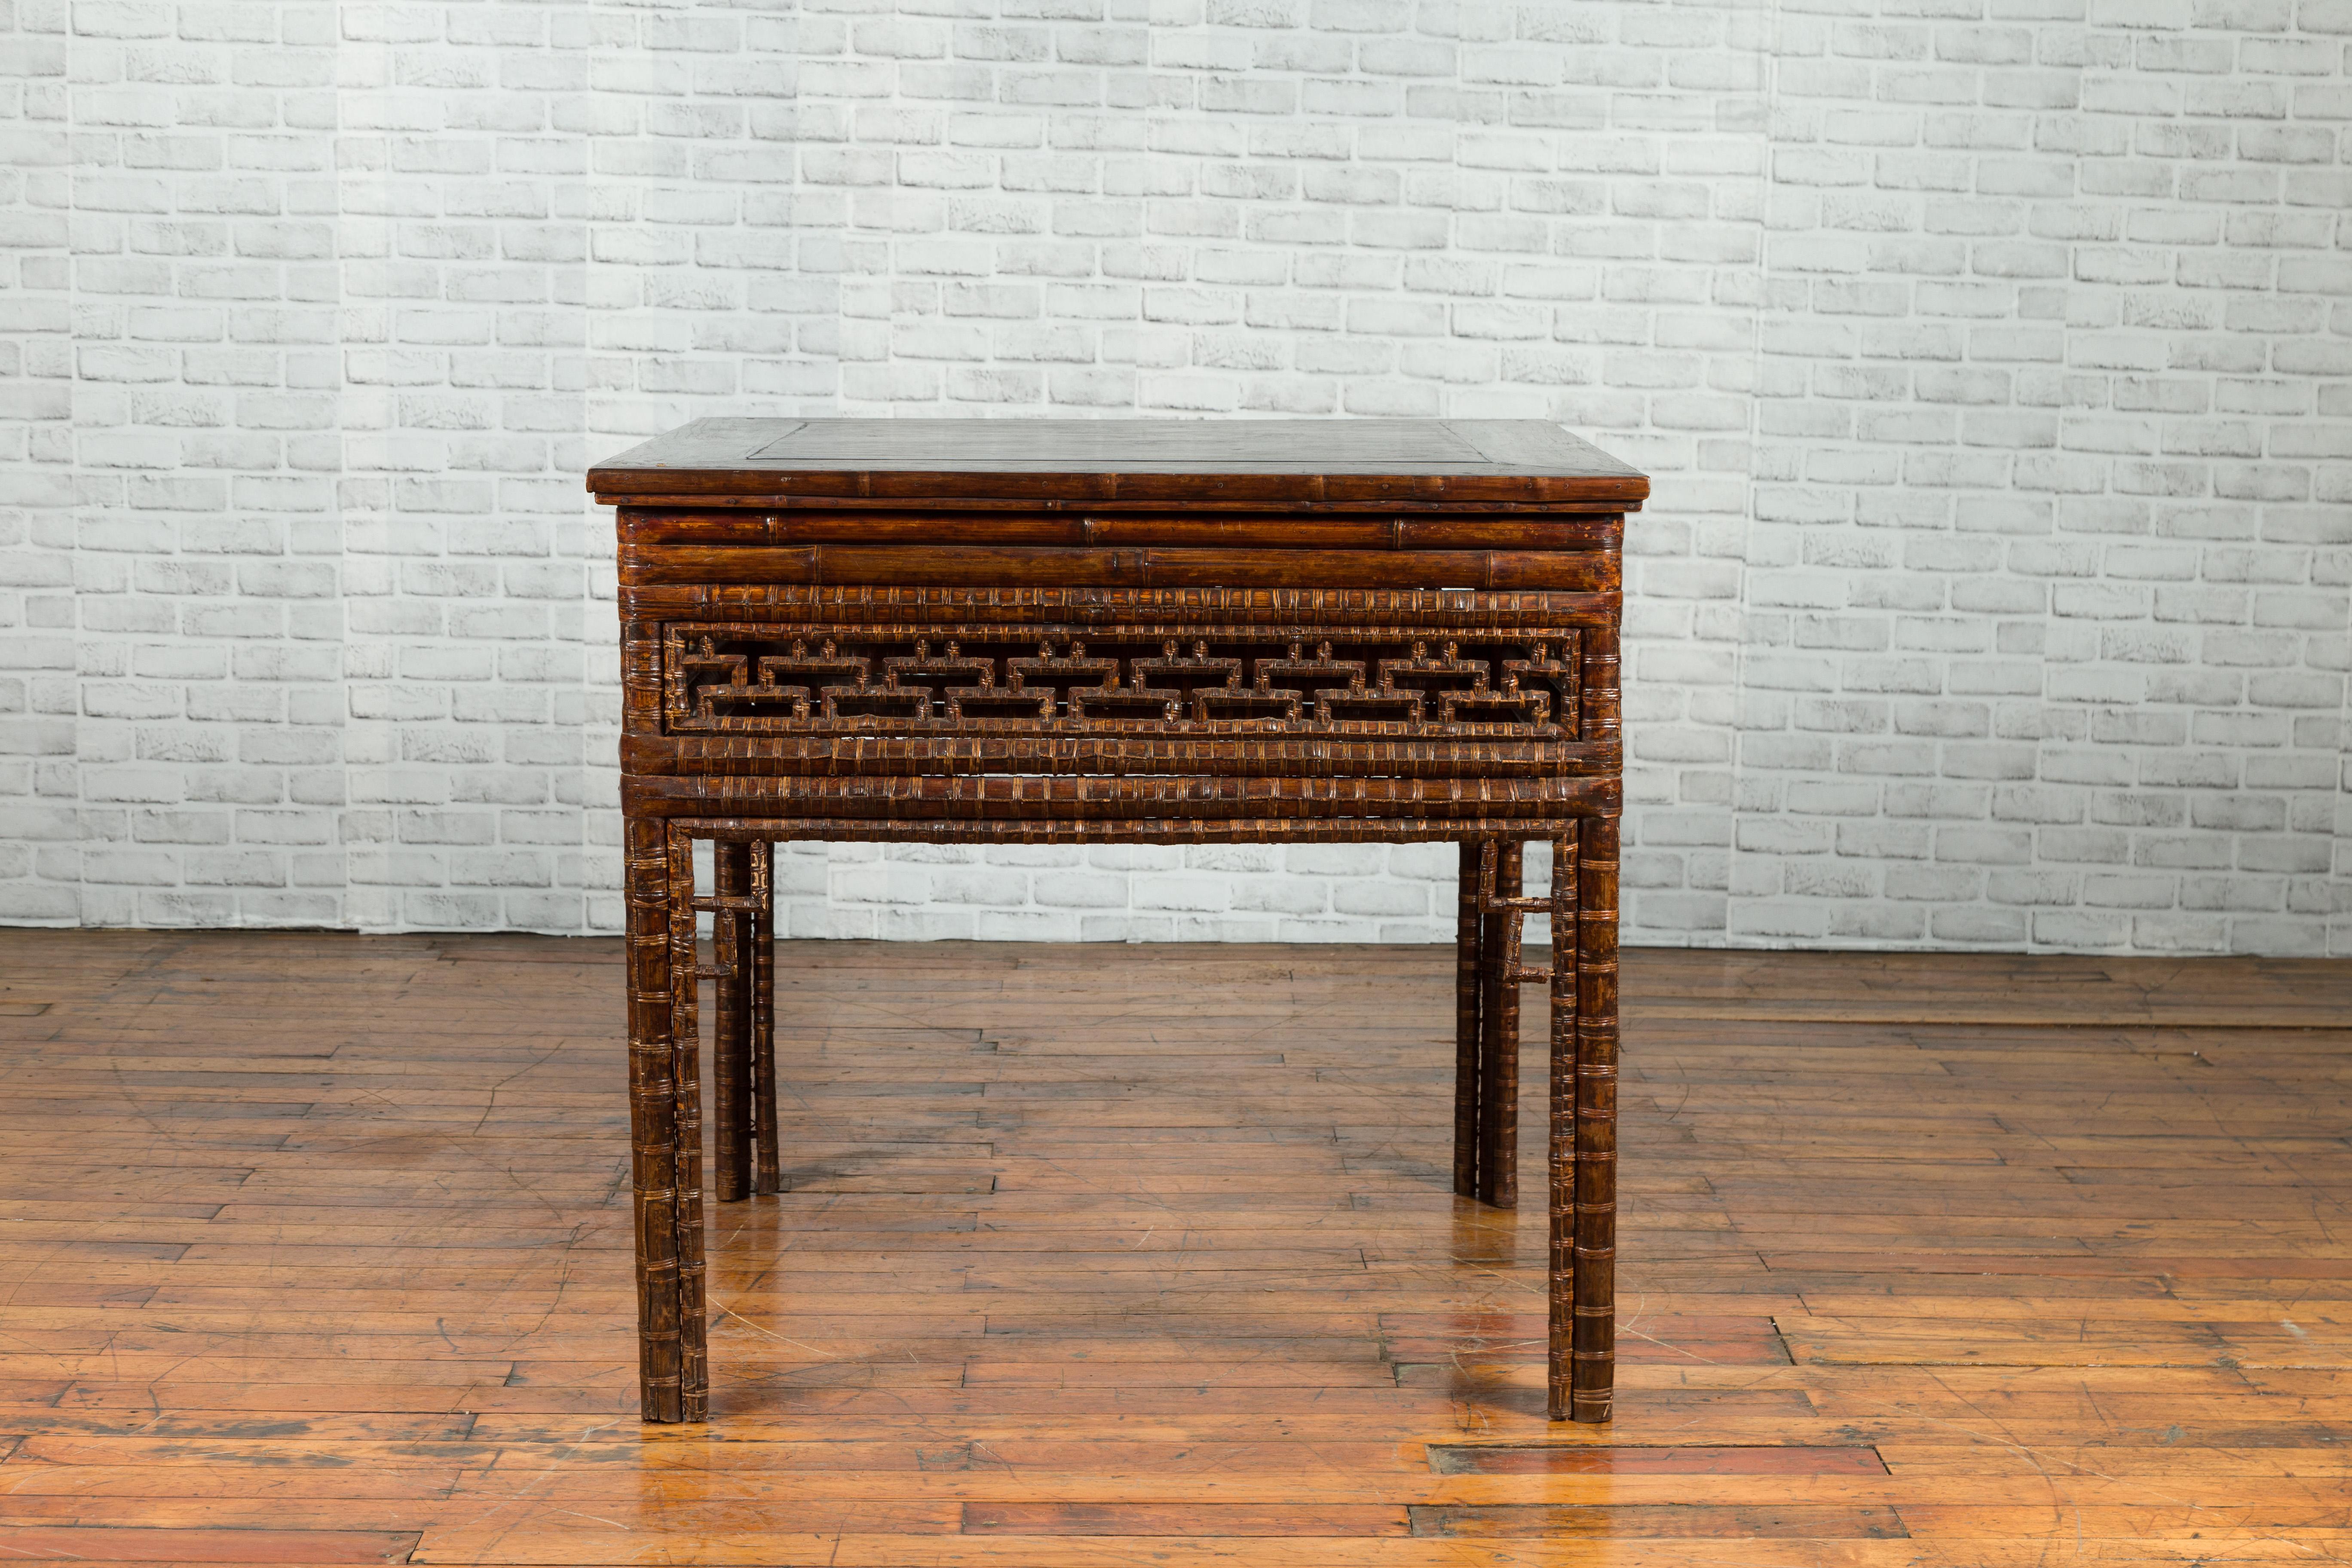 Chinese Qing Dynasty Period 19th Century Bamboo Hall Table with Fretwork Motifs For Sale 8